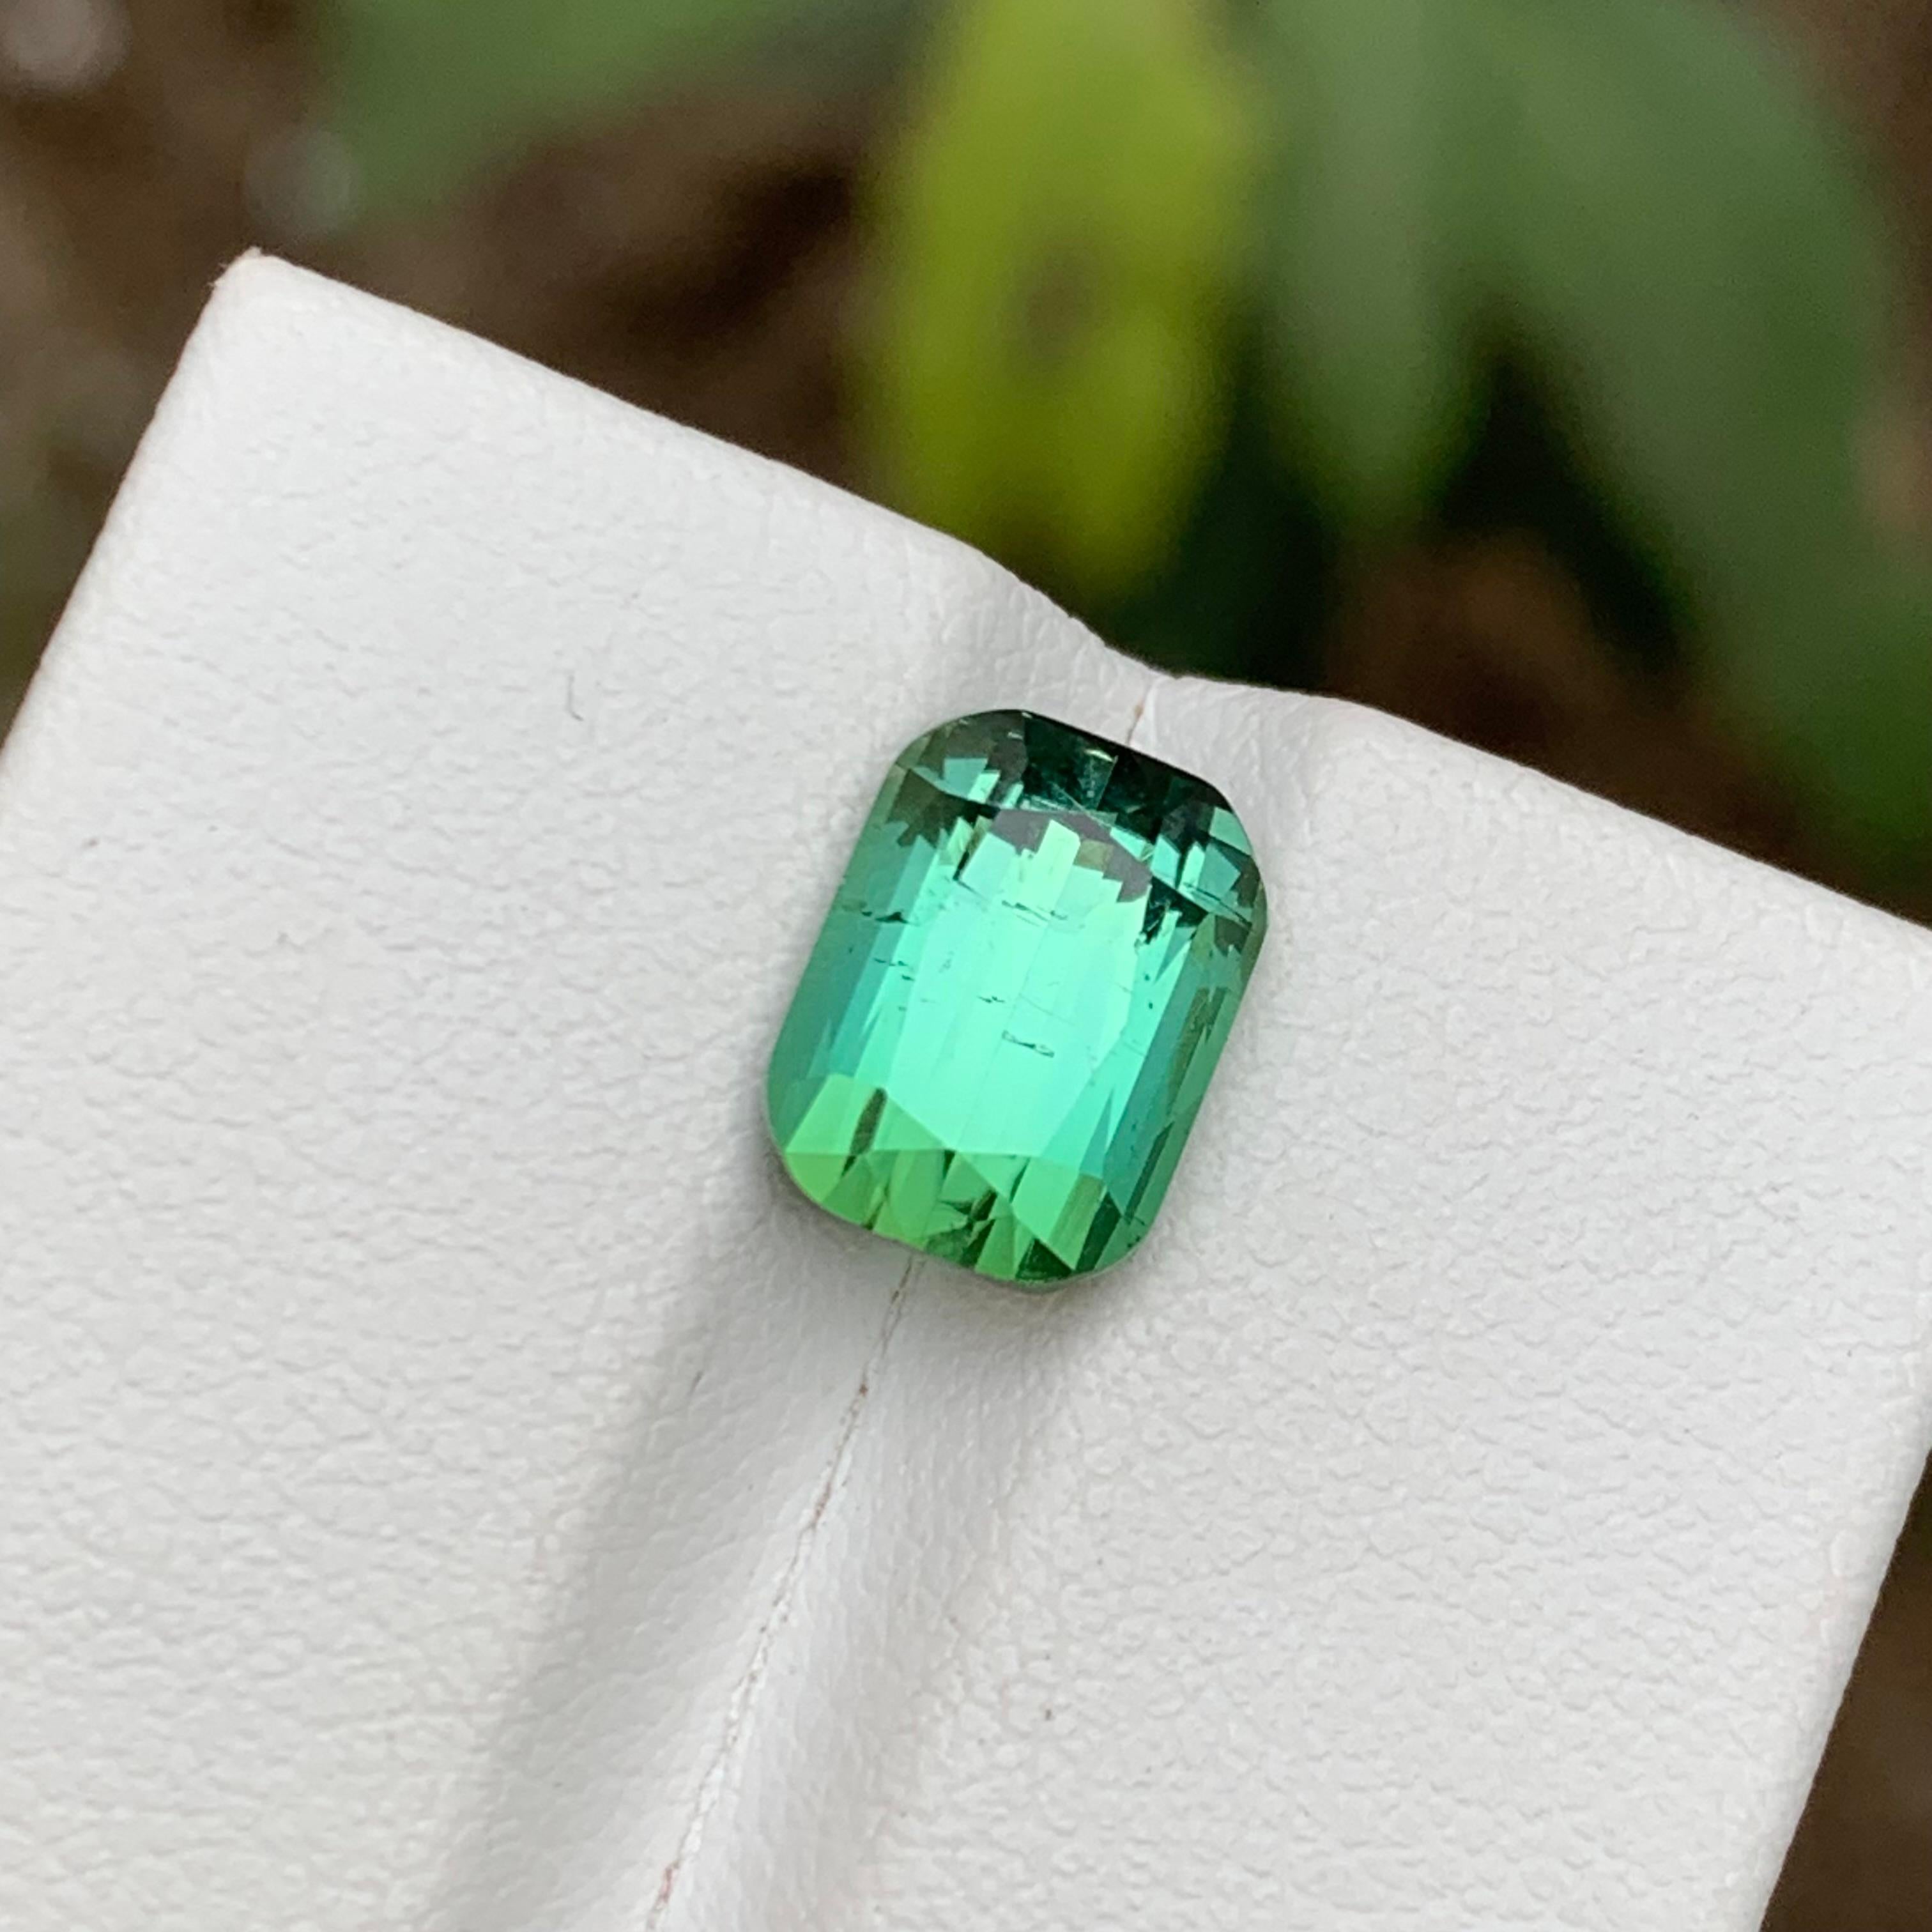 GEMSTONE TYPE: Tourmaline
PIECE(S): 1
WEIGHT: 3.85 Carats
SHAPE: Cushion Cut
SIZE (MM): 9.63 x 7.24 x 6.30
COLOR: Mint Green
CLARITY: Slightly Included 
TREATMENT: None
ORIGIN: Afghanistan
CERTIFICATE: On demand

Introducing our exquisite 3.85 Carat